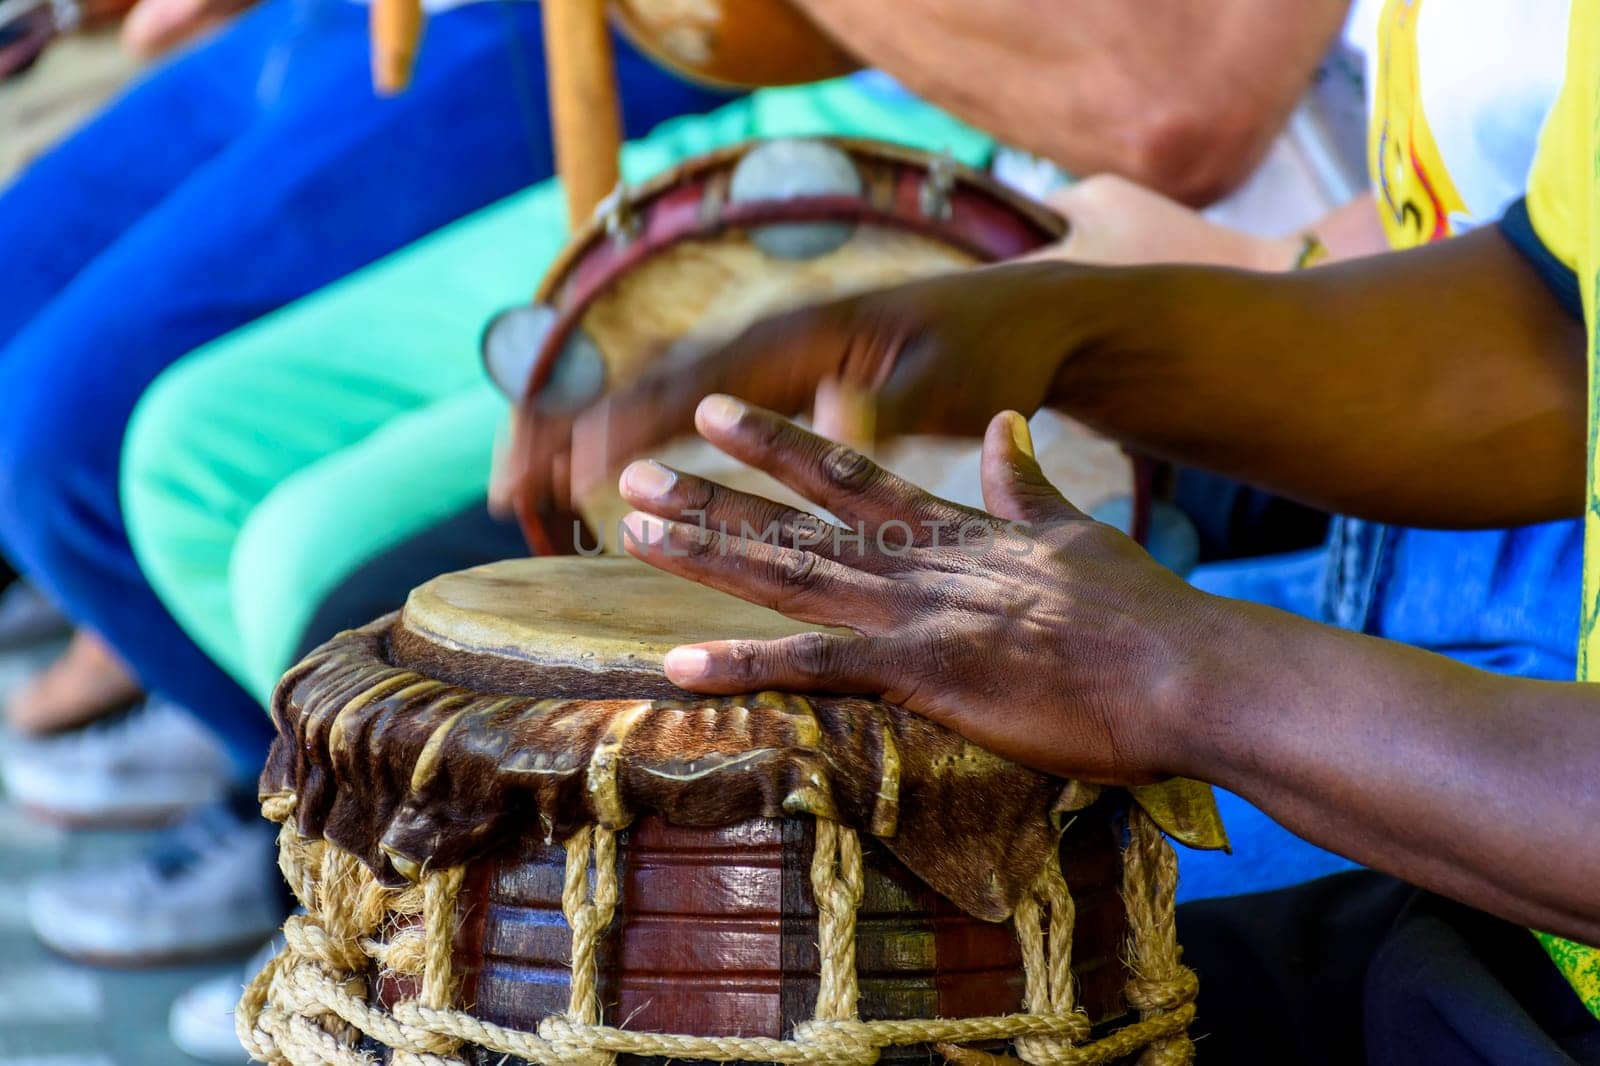 Percussion instrument called atabaque being played in traditional afro-brazilian capoeira presentation